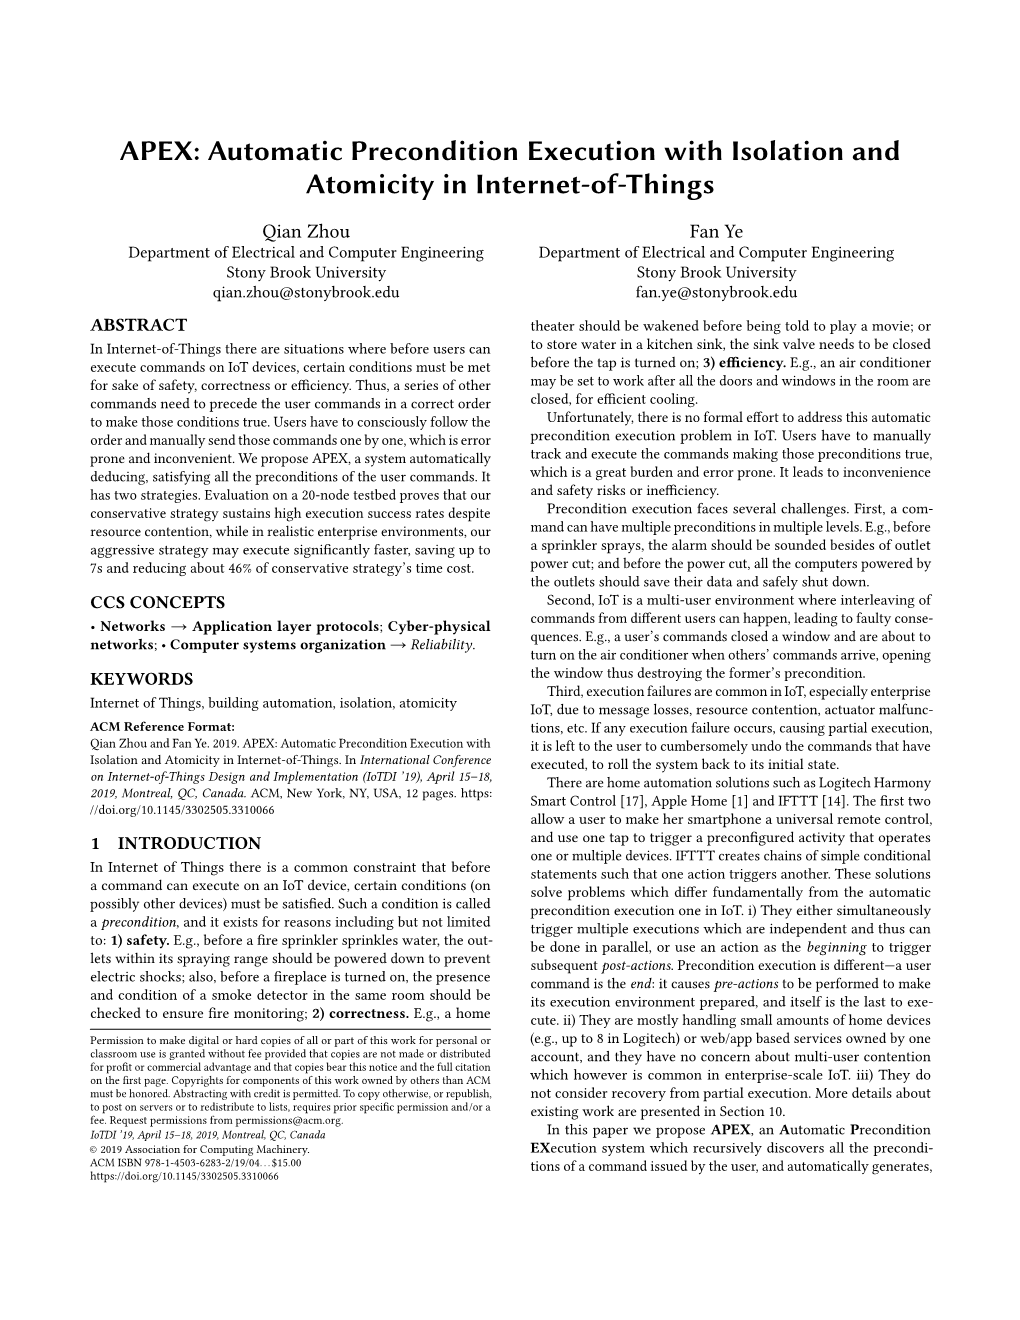 Automatic Precondition Execution with Isolation and Atomicity in Internet-Of-Things